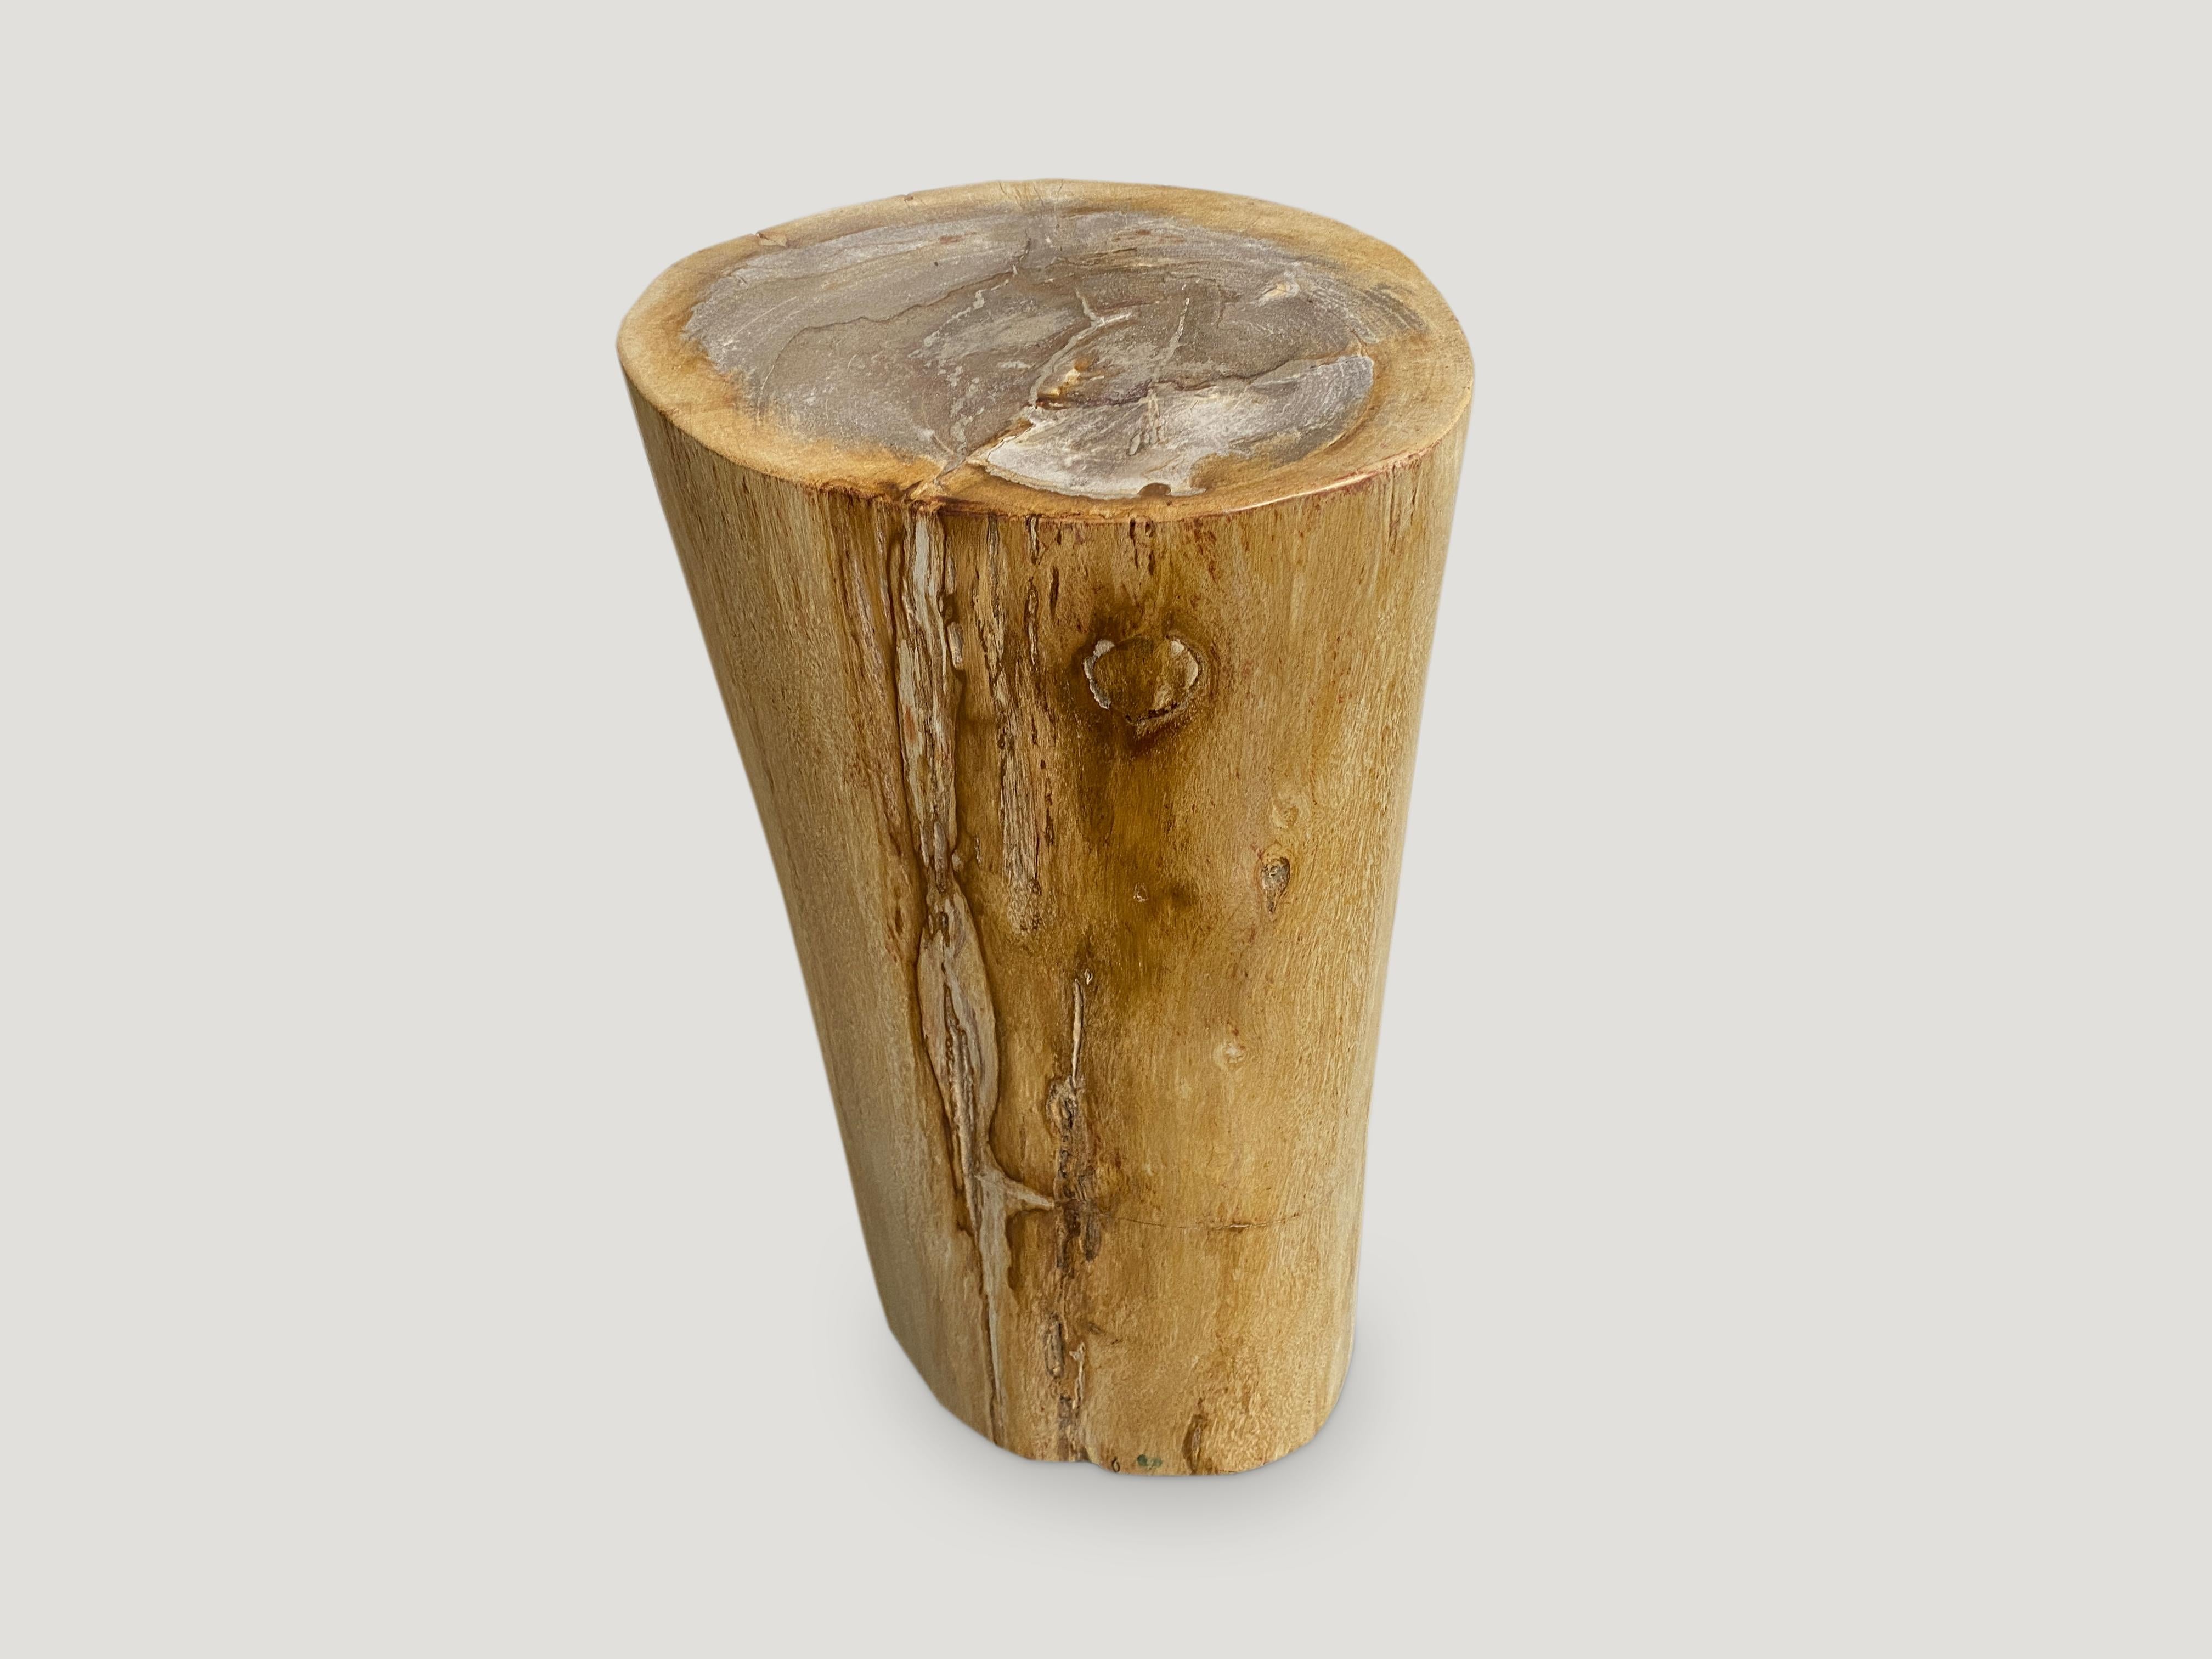 Beautiful Minimalist sand toned high quality petrified wood pedestal. We have a pair cut from the same petrified wood log. The size and price reflect the one shown.

As with a diamond, we polish the highest quality fossilized petrified wood, using